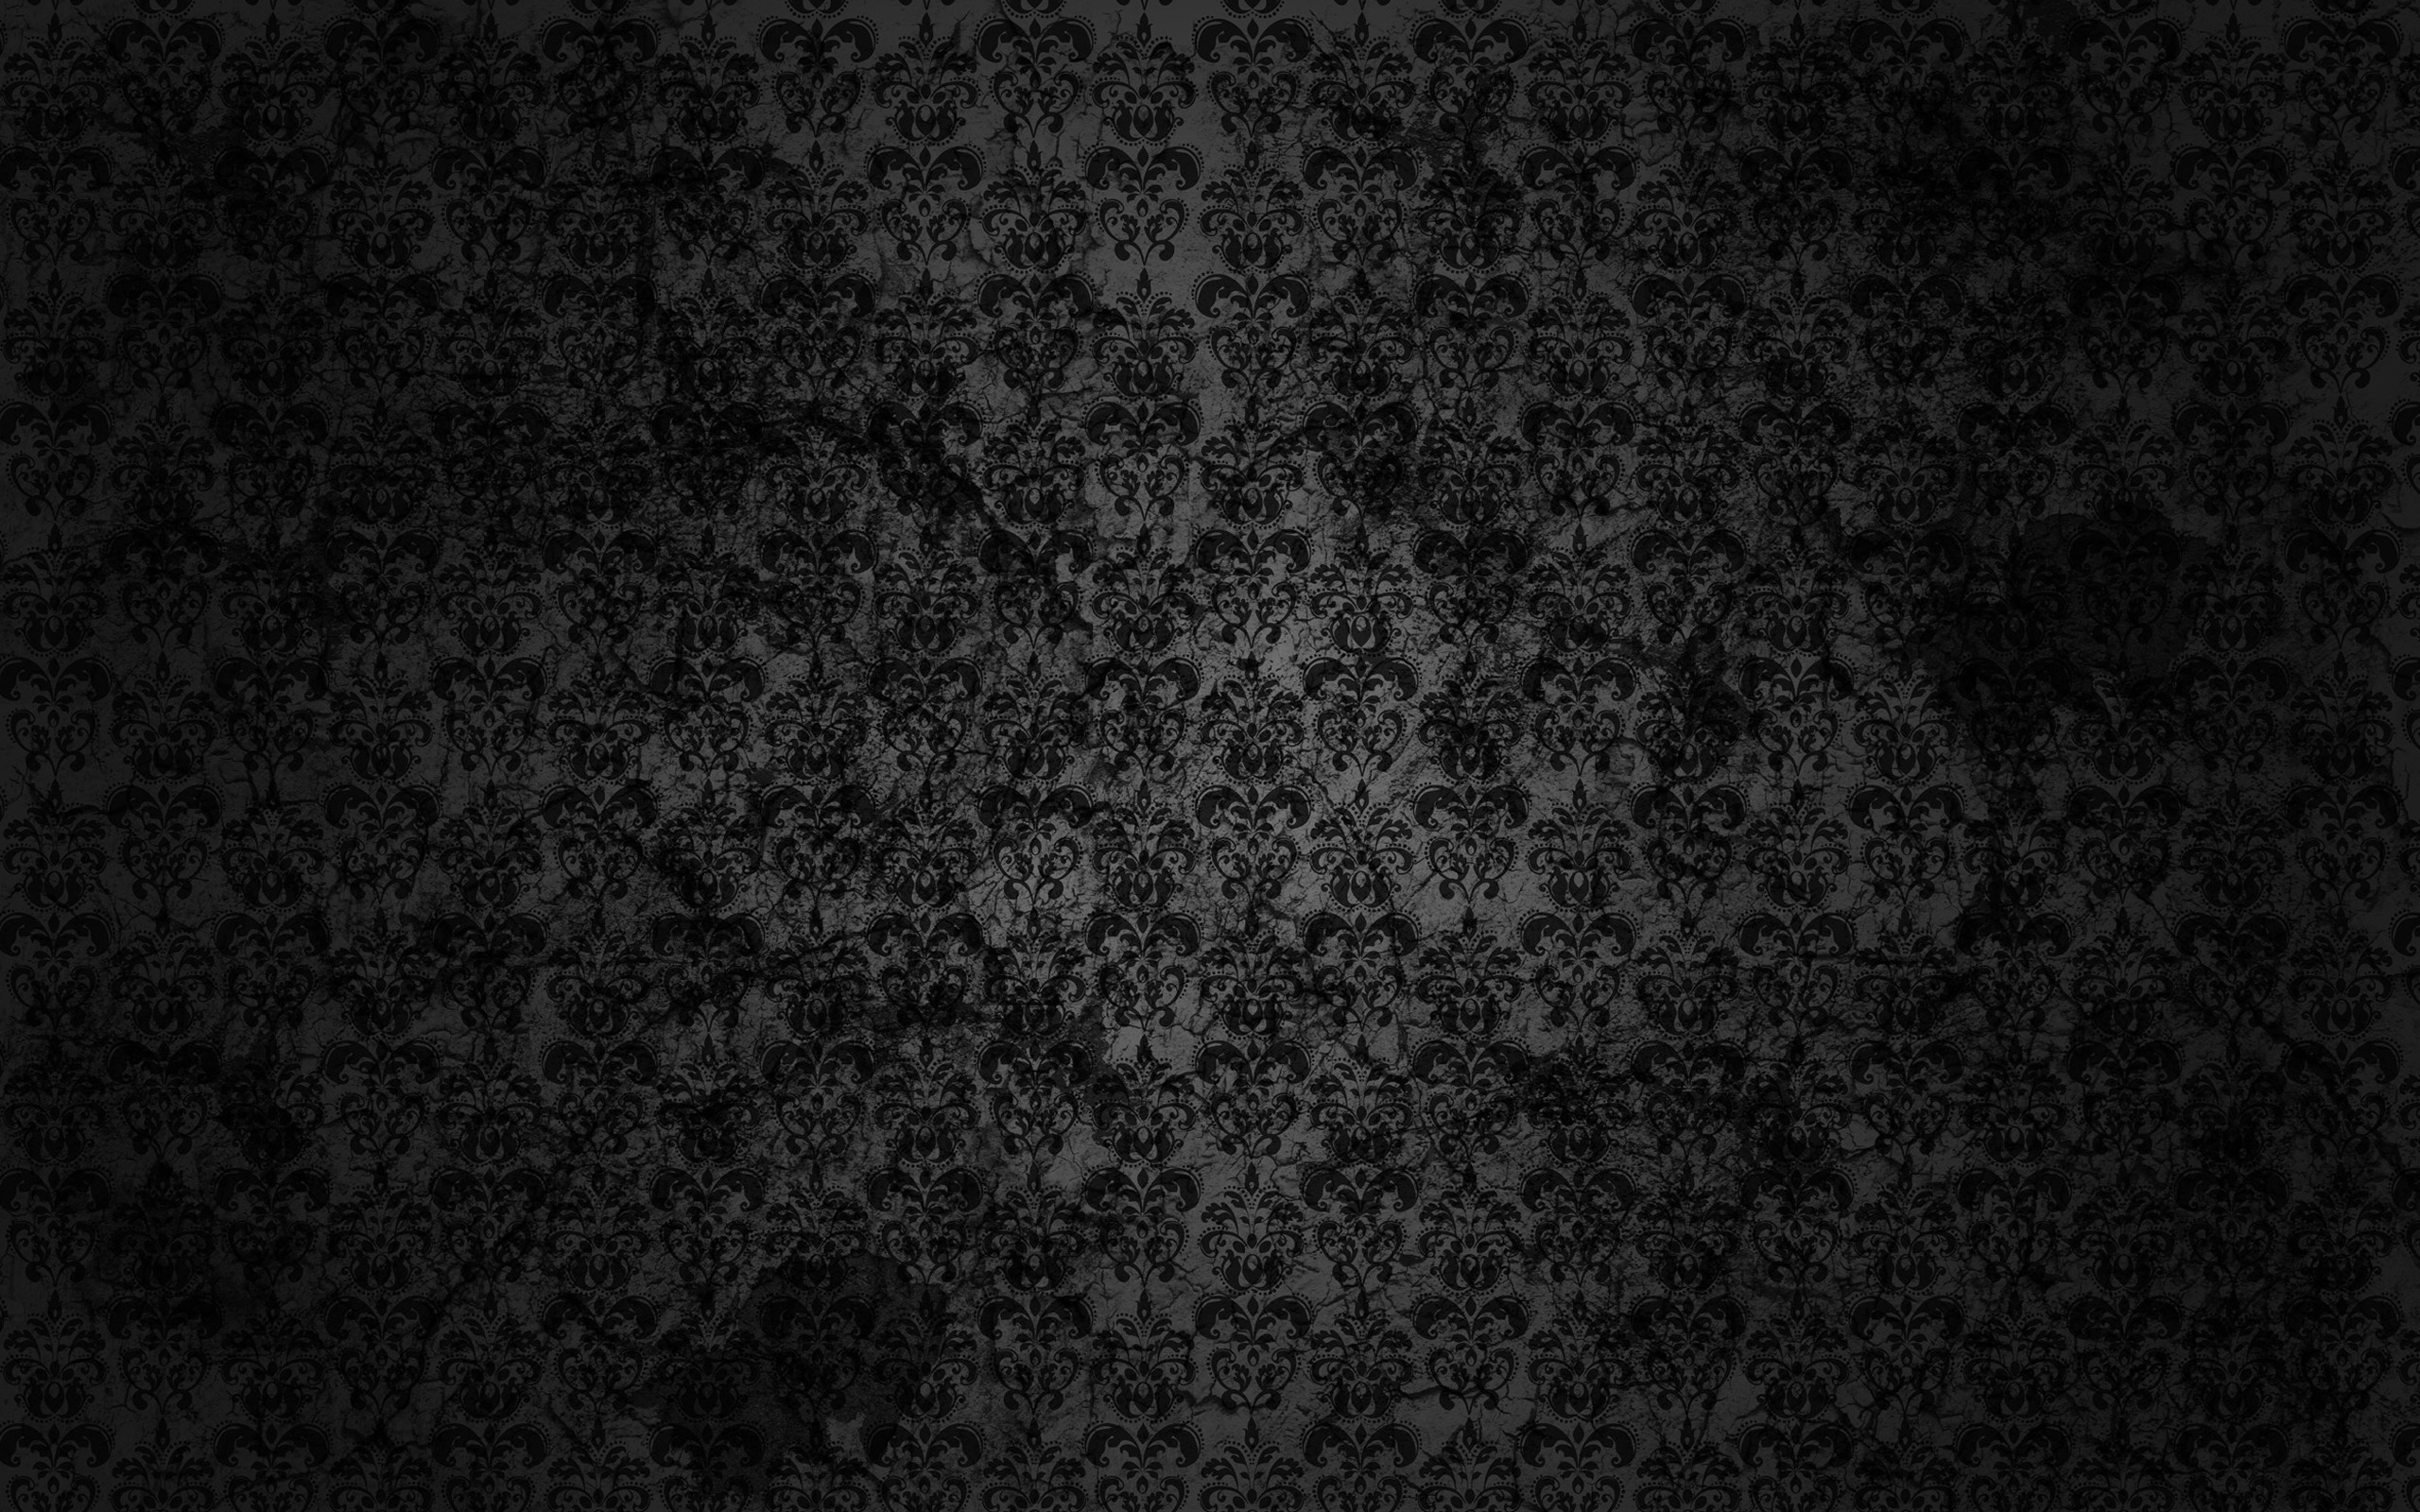 Black Floral Grunge for 2560 x 1600 widescreen resolution